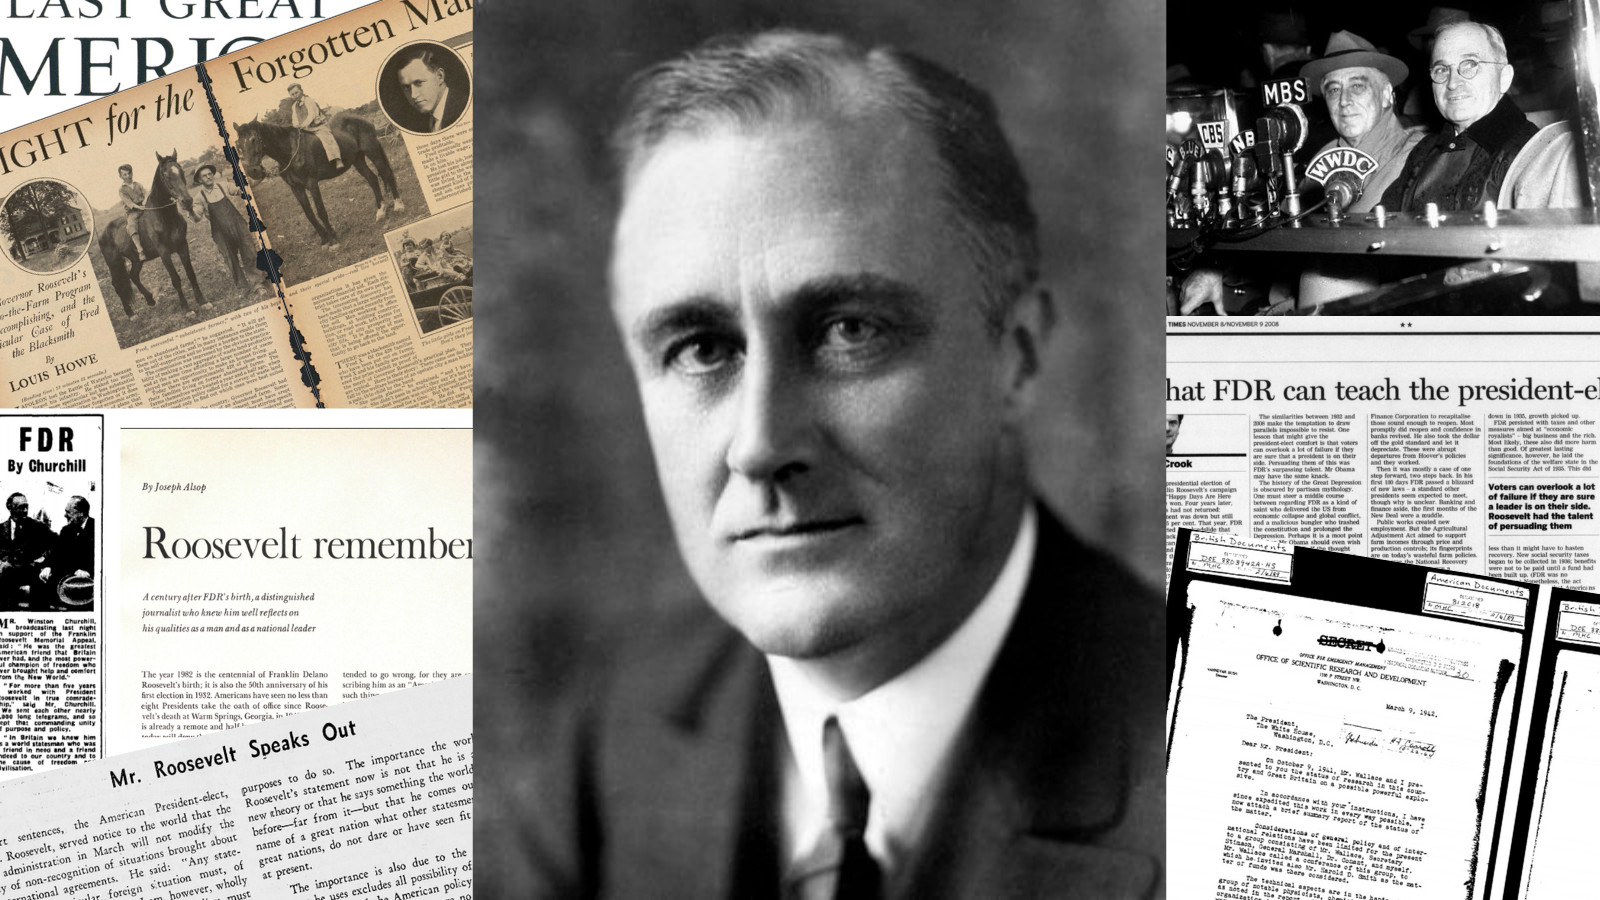 Franklin Delano Roosevelt and images from this blog post